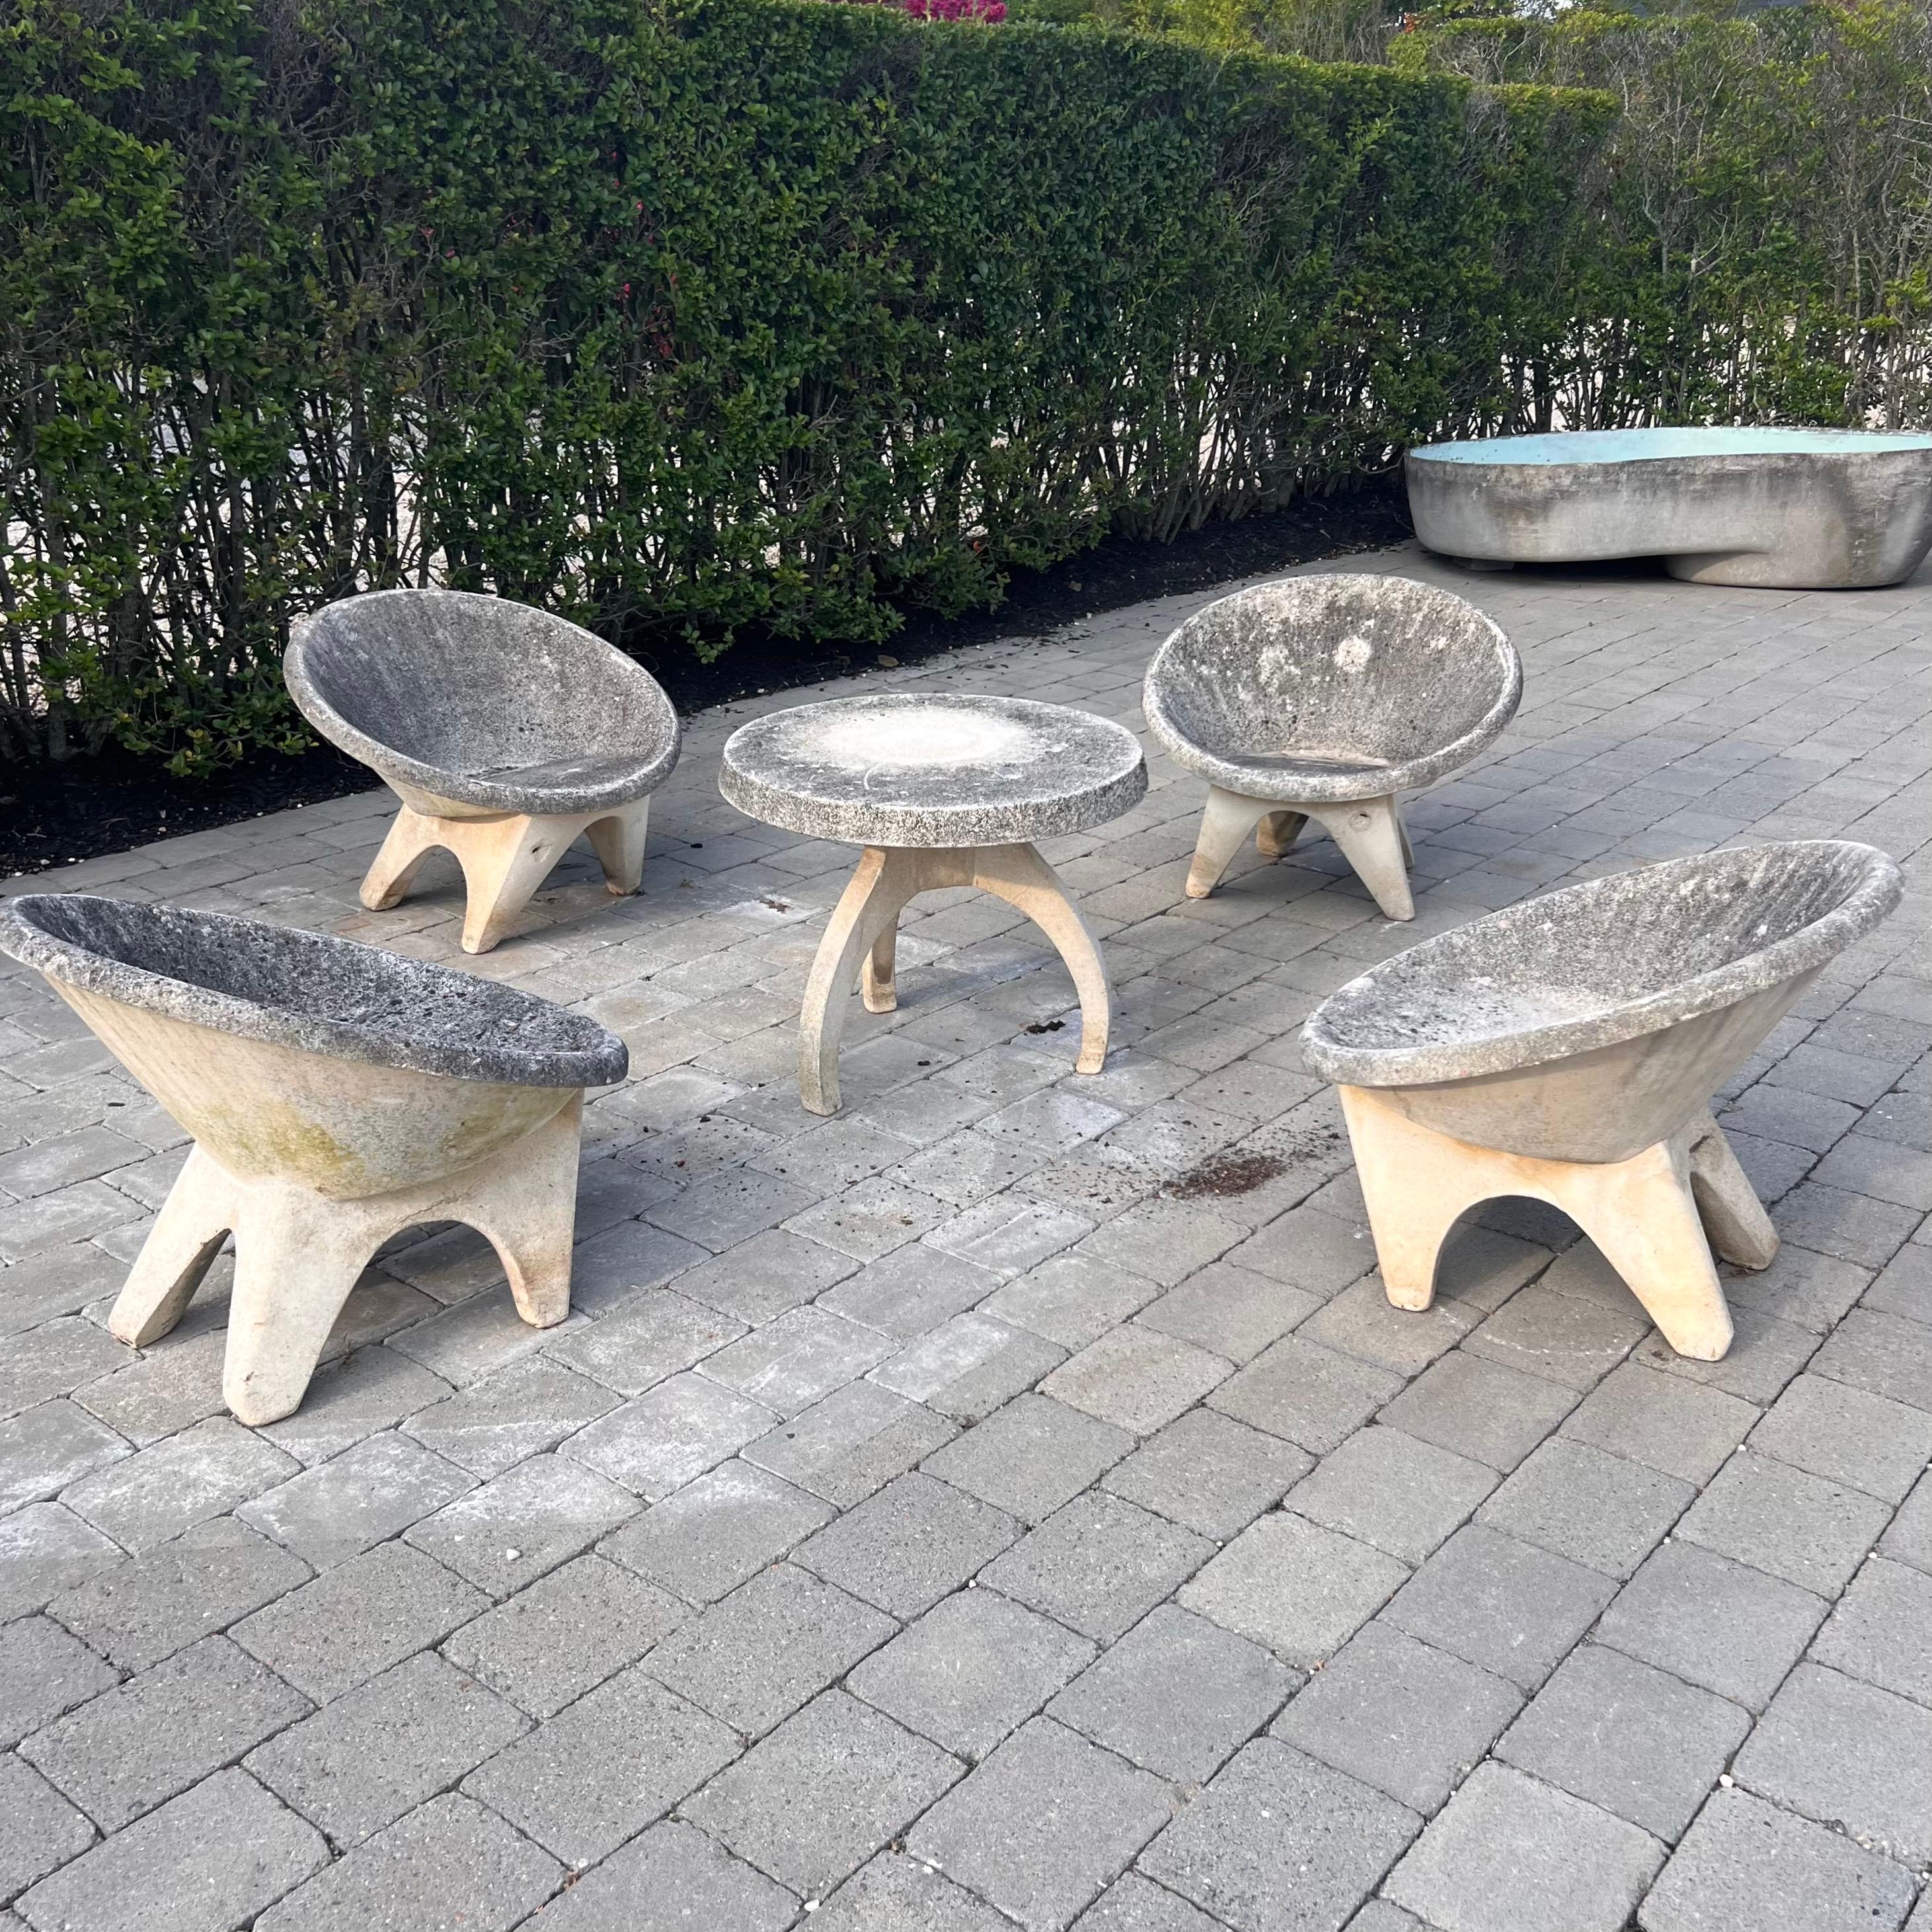 Set of 4 Sculptural Concrete Chairs and Table, 1960s Belgium For Sale 4